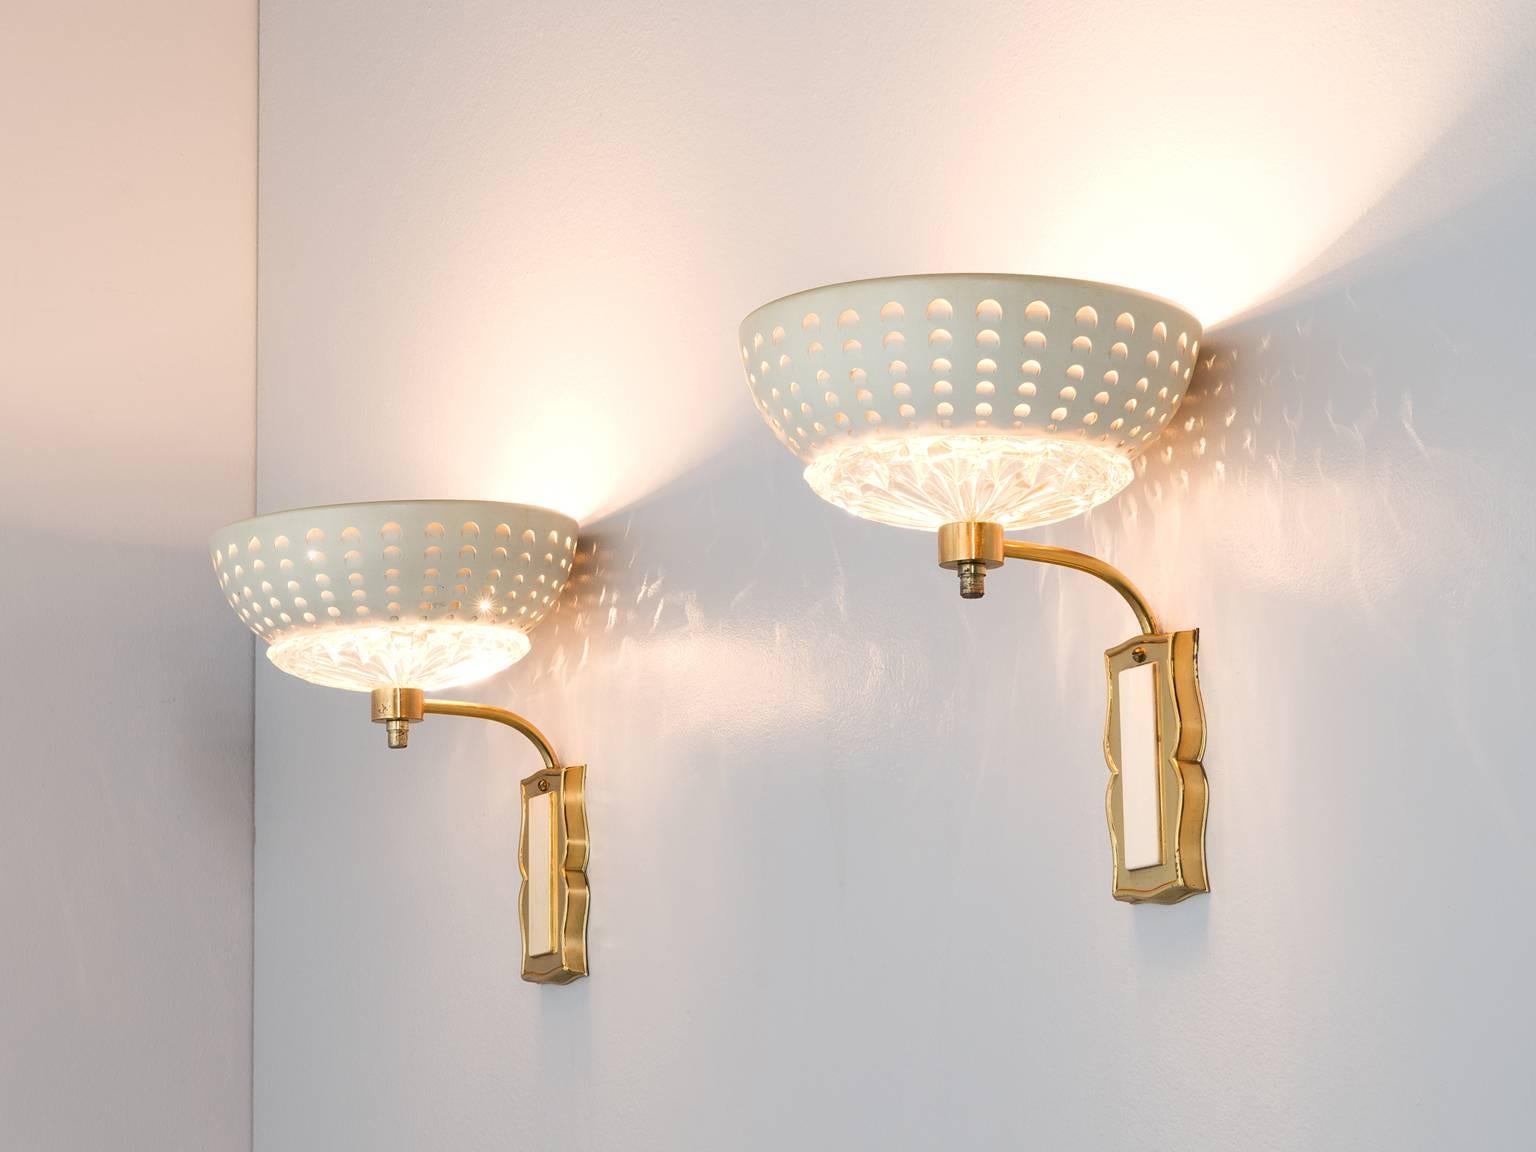 Pair of wall lights, in brass, glass and metal, Europe, 1970s. 

Elegant pair of wall lights in brass. The brass fixture holds an arch on which the bowl shaped lights are mounted. Each light consist of a small structured glass scale, with on top a